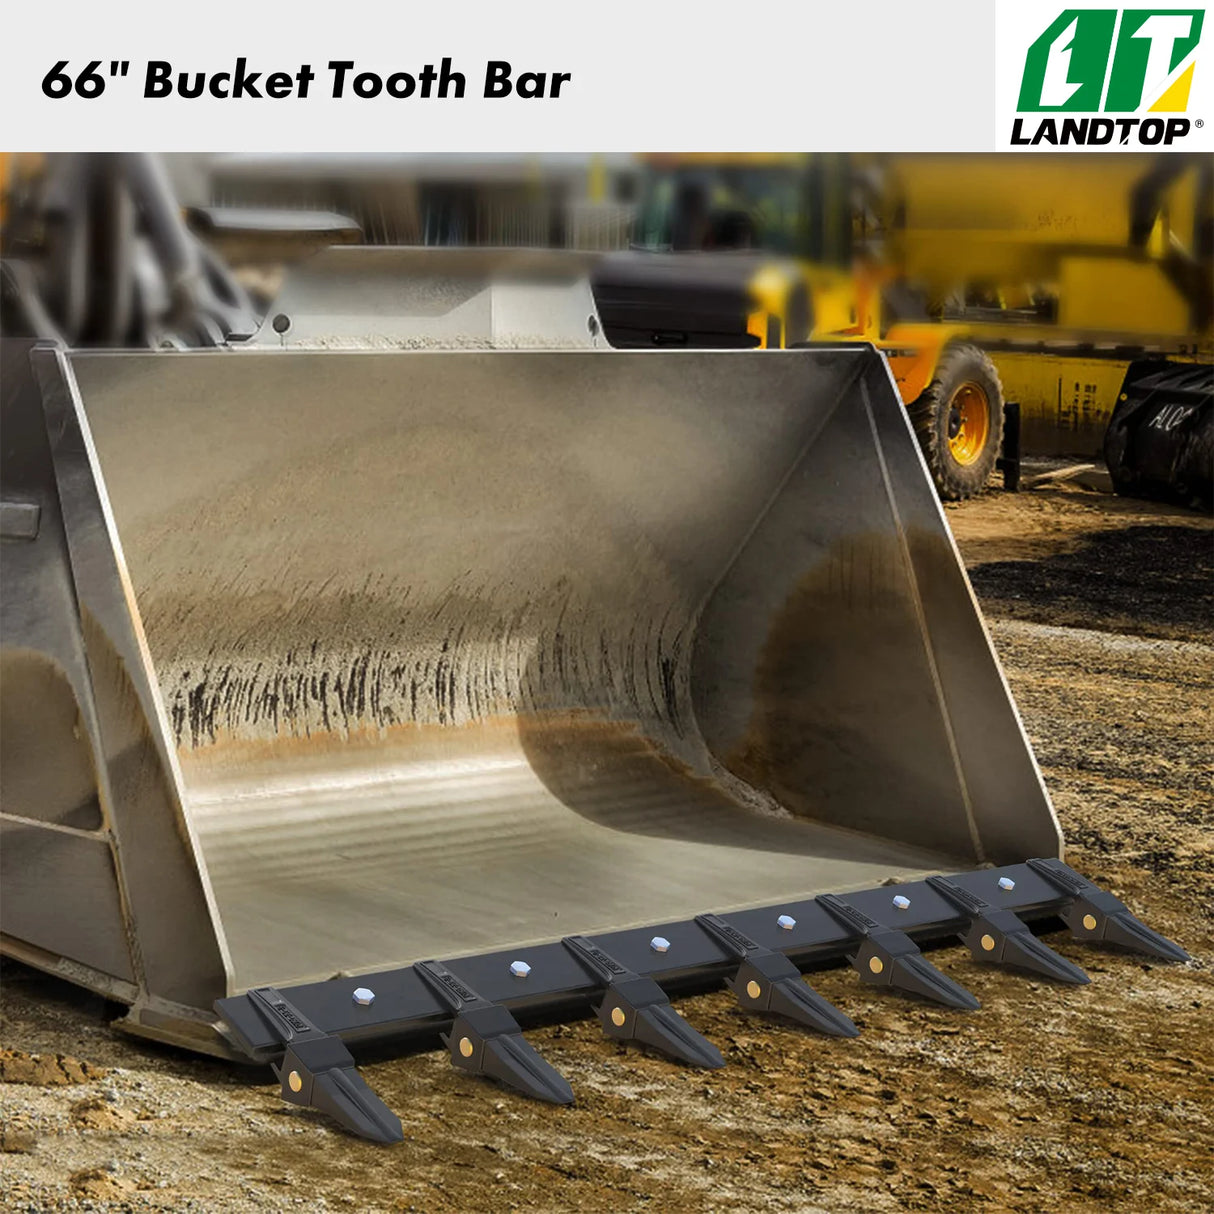 66" Bucket Tooth Kit for Loader Tractor for Bucket Protection Steel